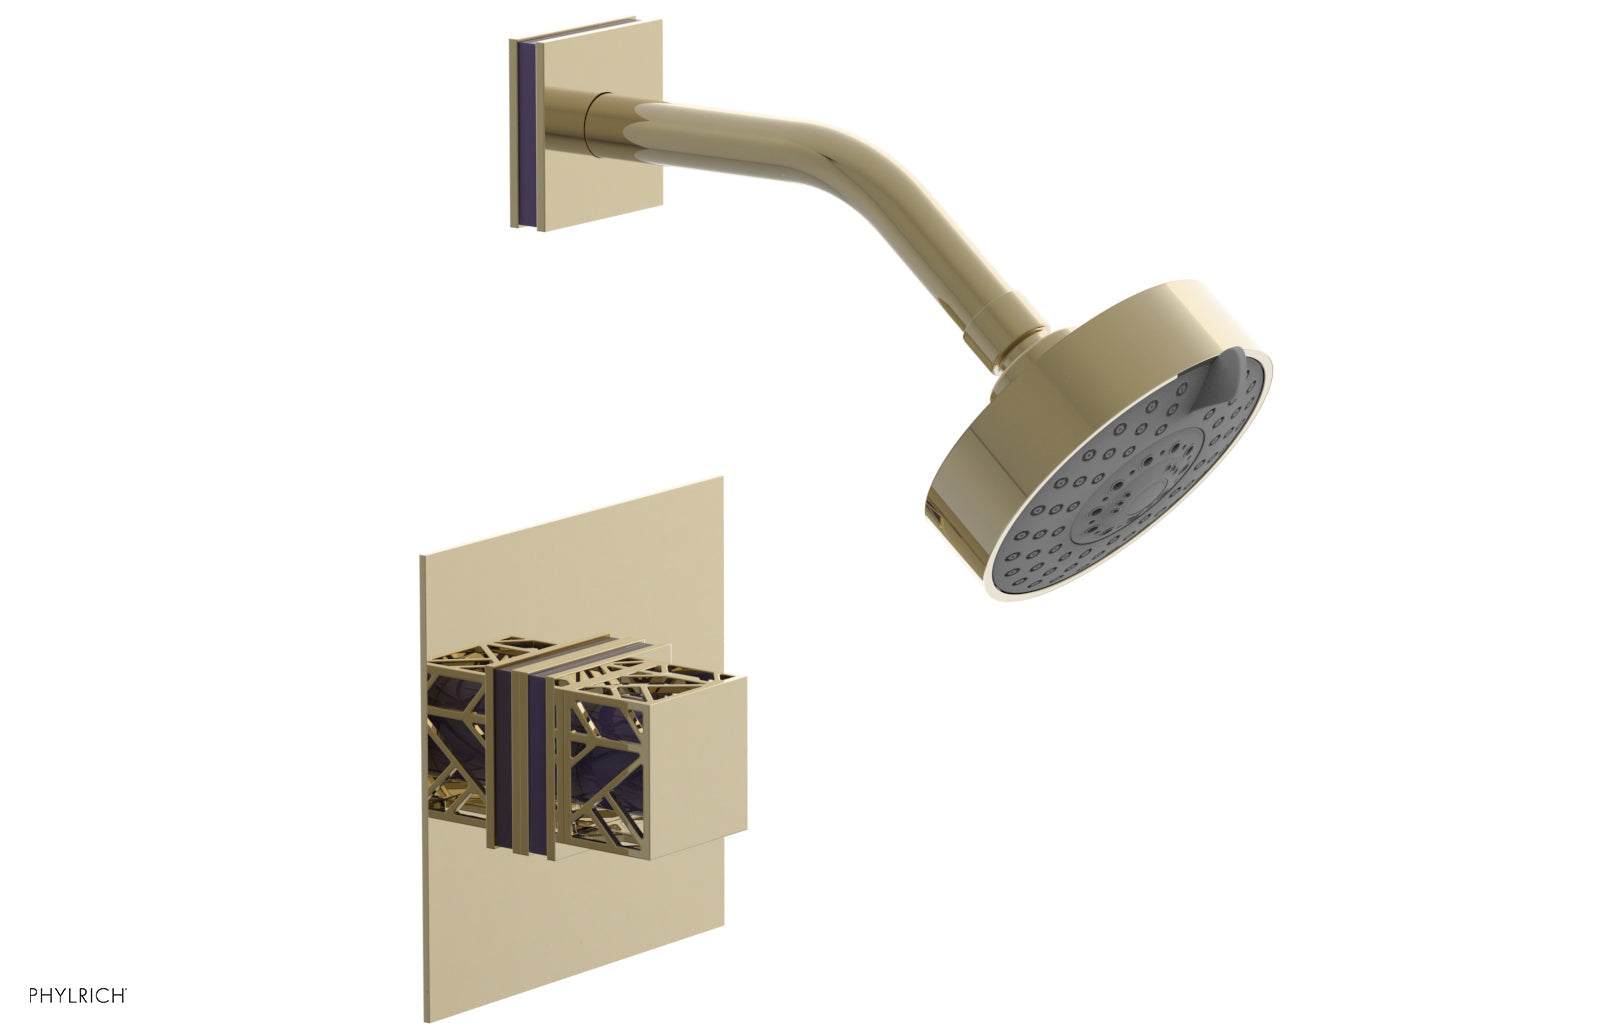 Phylrich JOLIE Pressure Balance Shower Set - Square Handle with "Purple" Accents